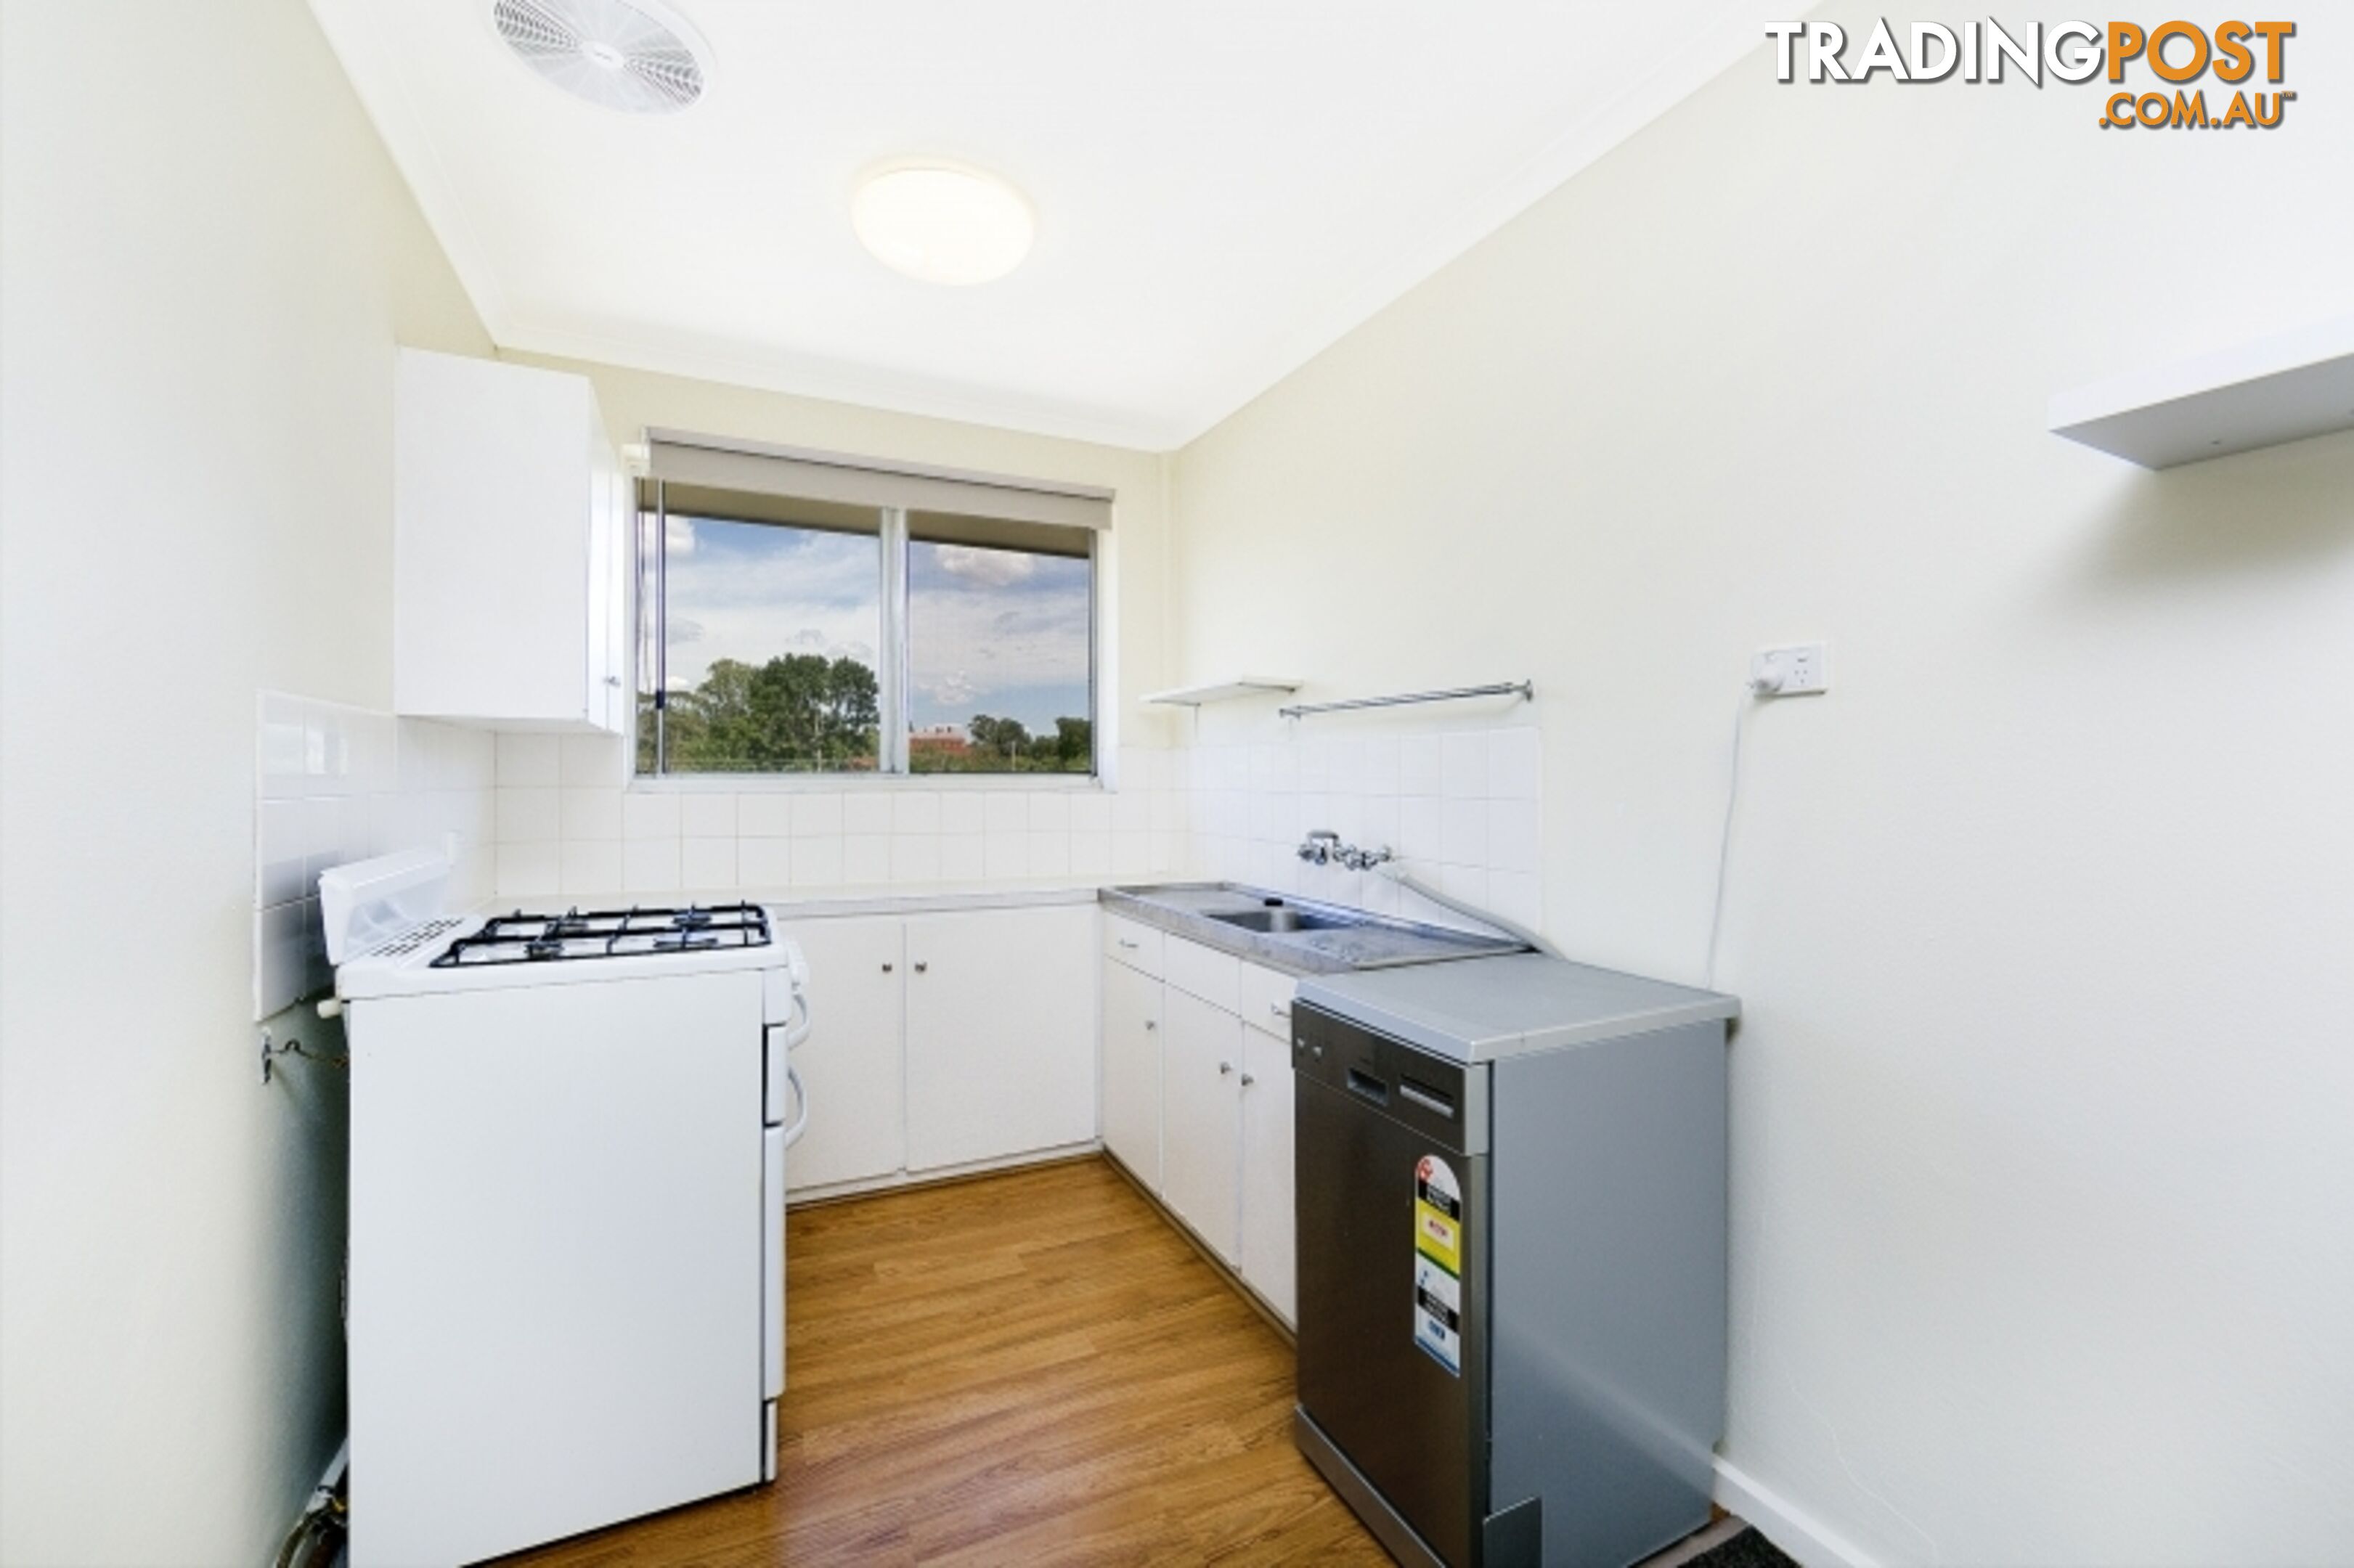 10/56 Trinculo Place QUEANBEYAN NSW 2620